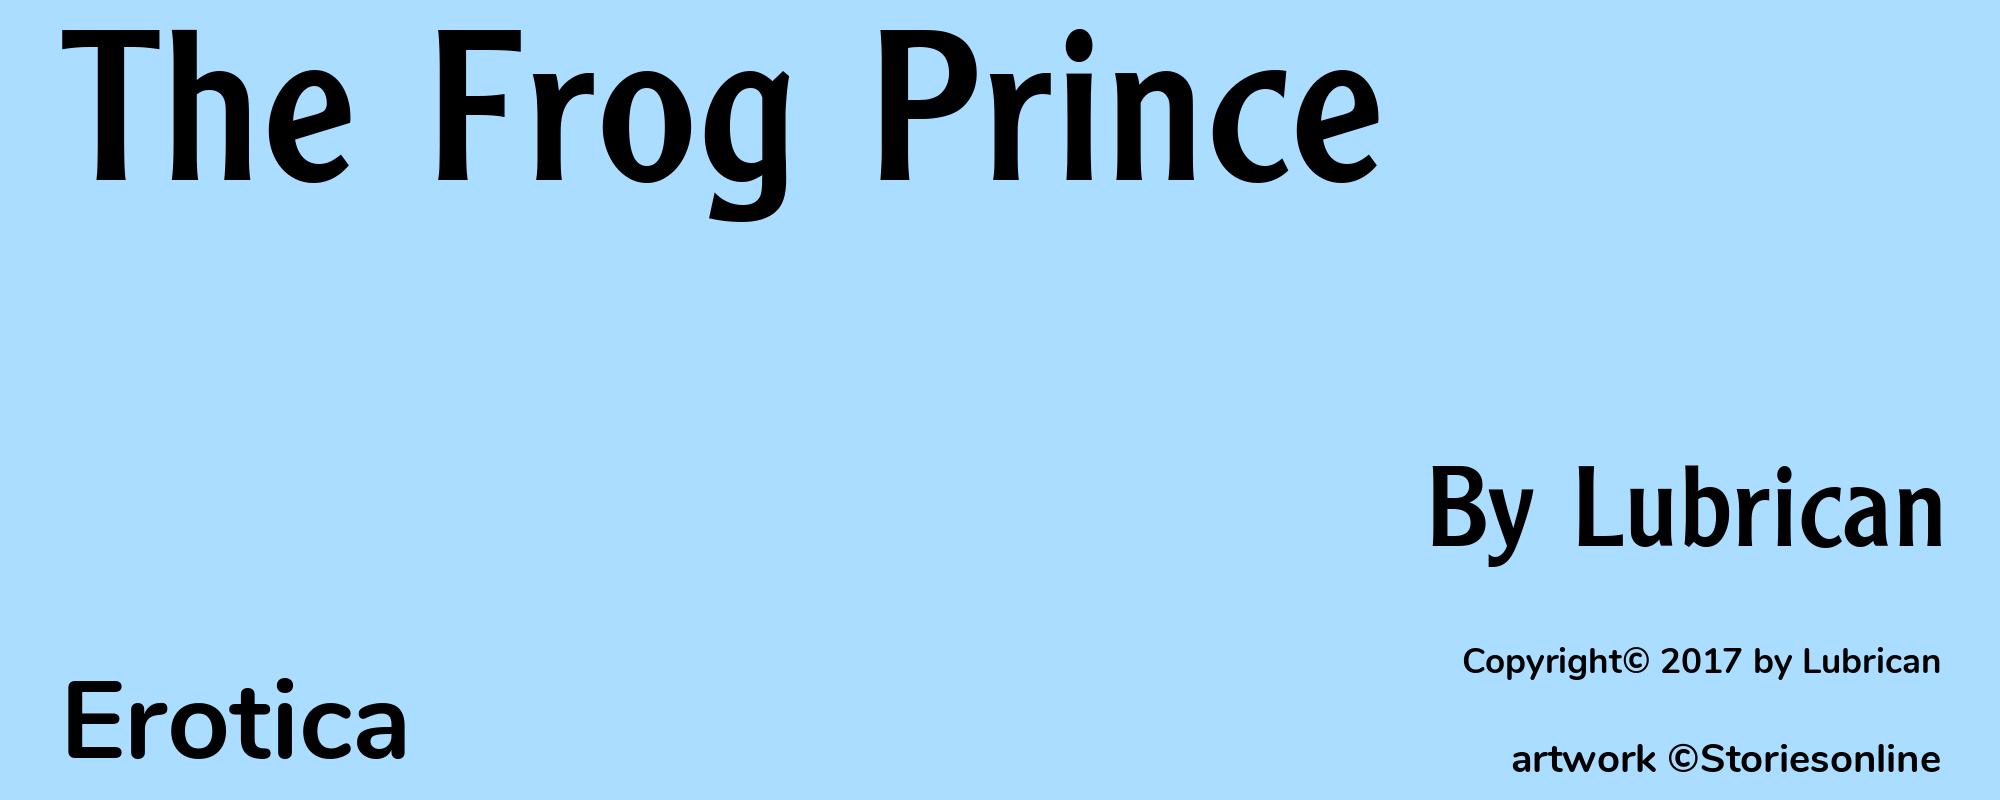 The Frog Prince - Cover